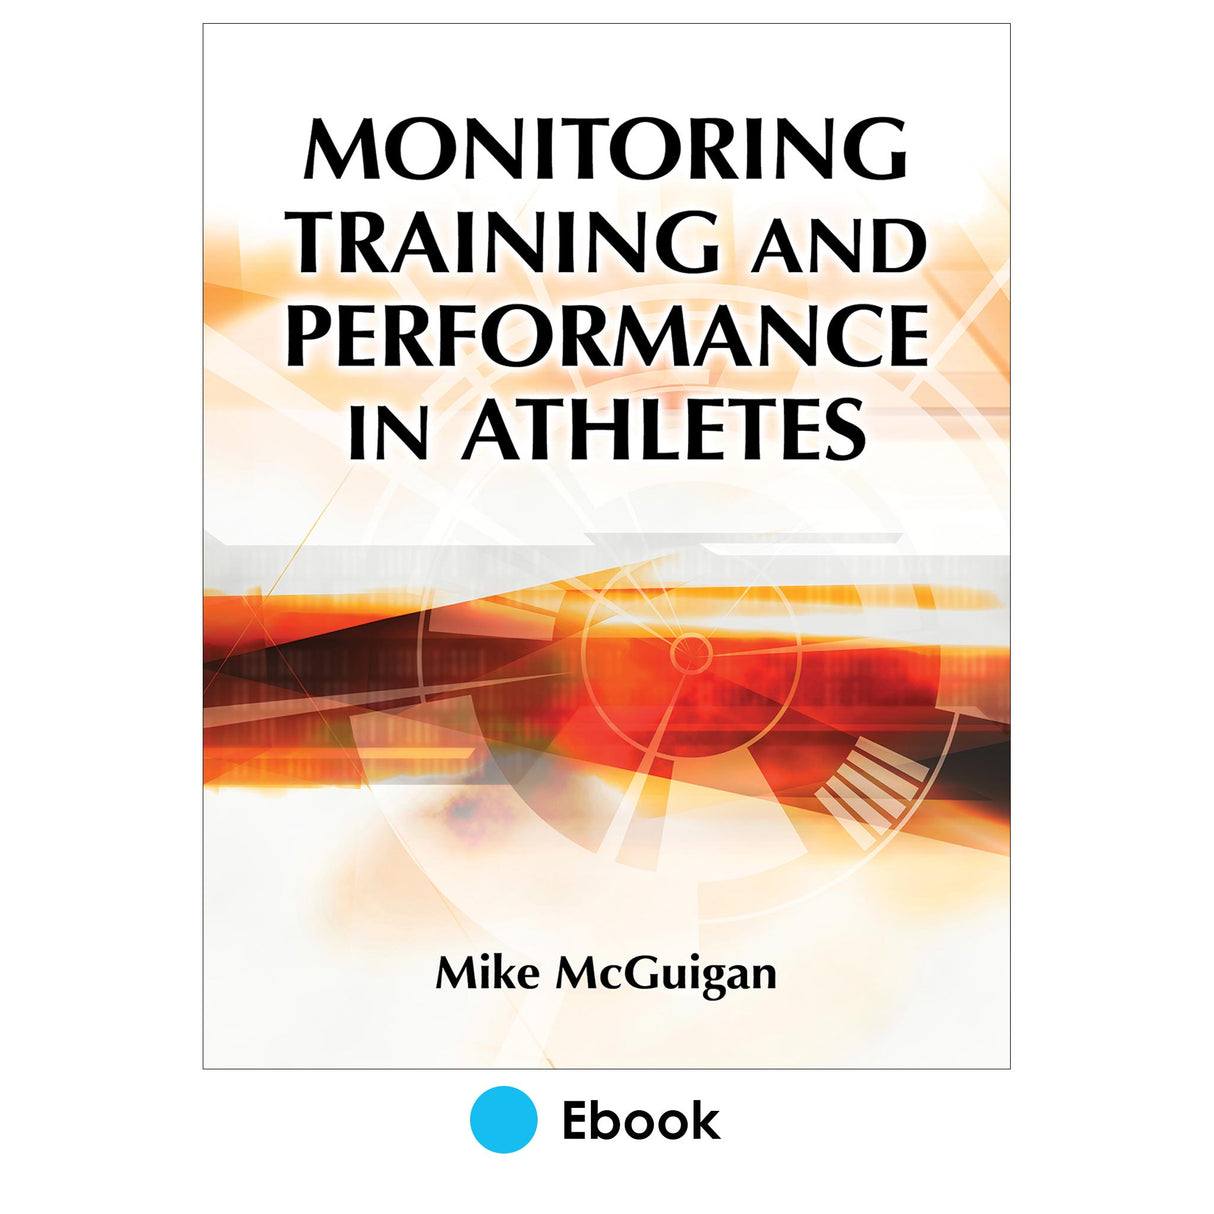 Monitoring Training and Performance in Athletes PDF